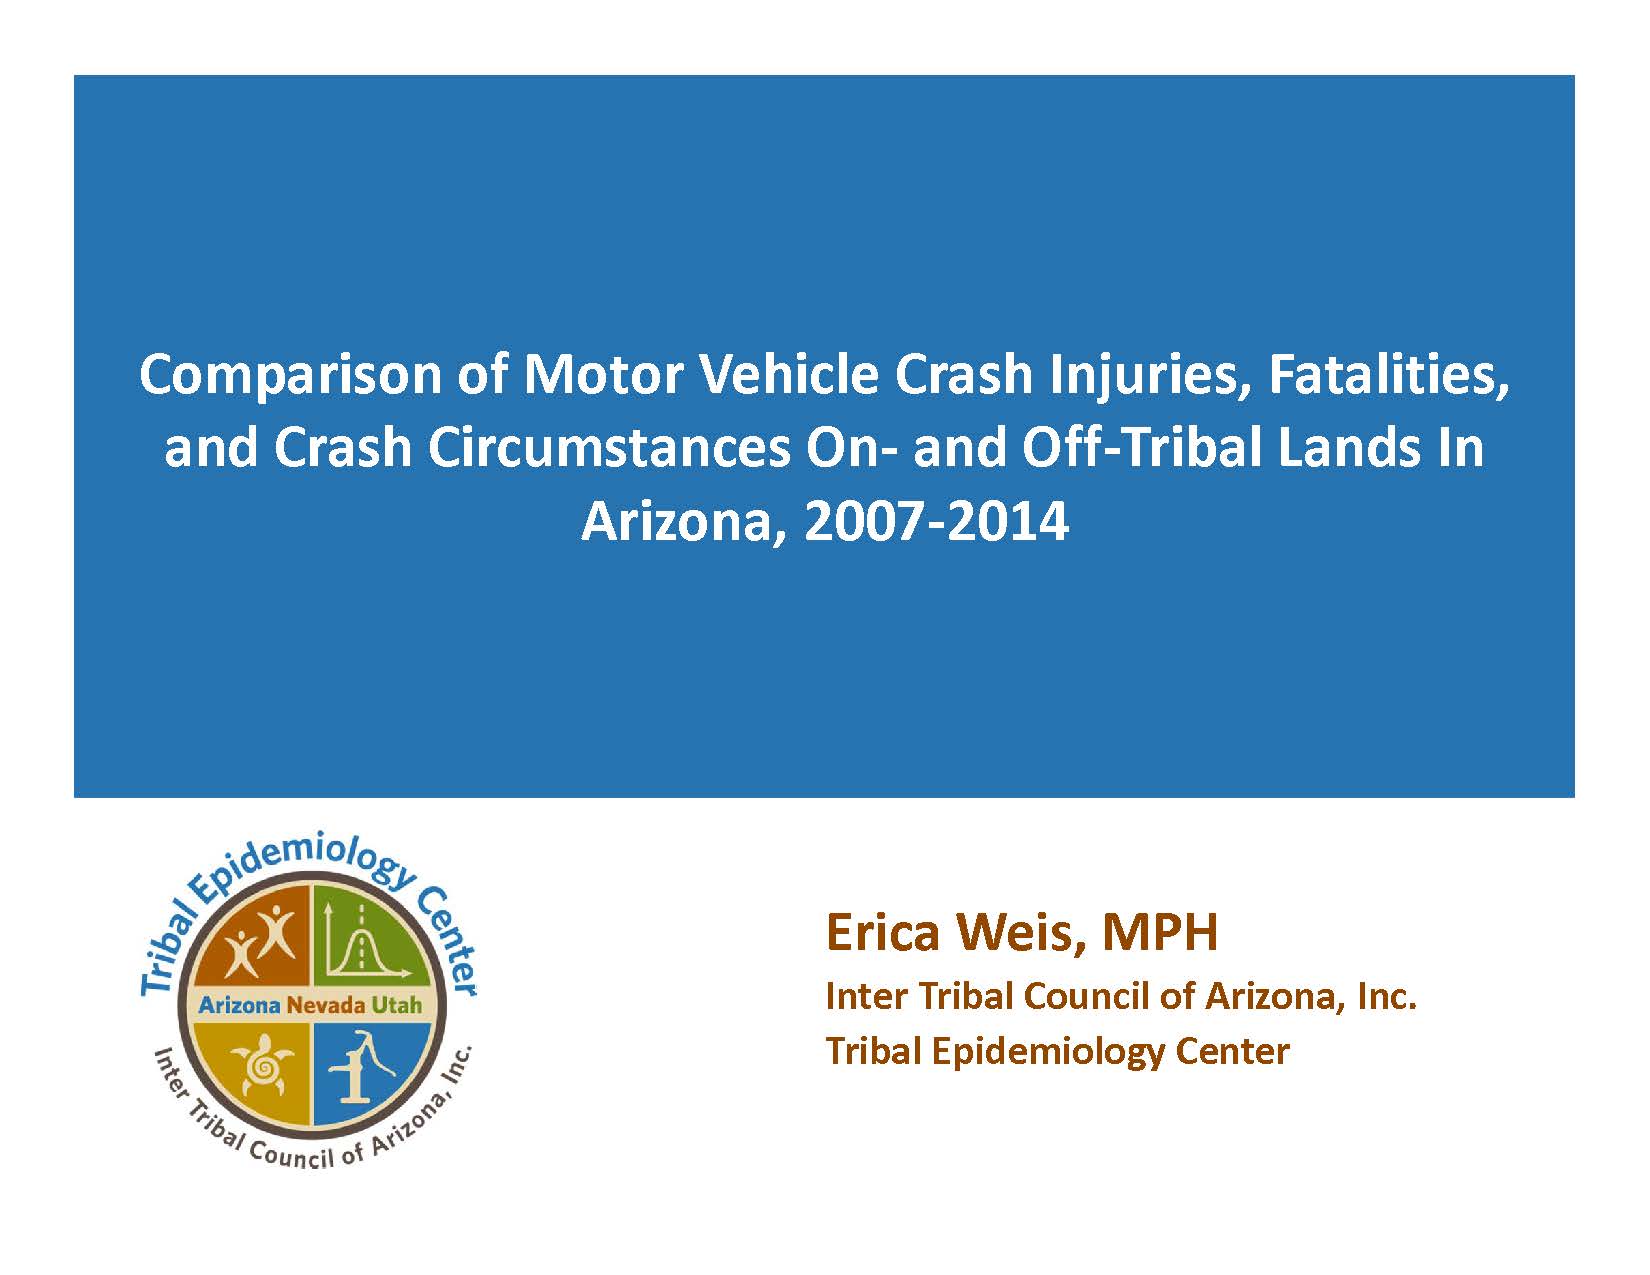 Comparison of Motor Vehicle Crash Injuries, Fatalities, and Crash Circumstances On- and Off-Tribal Lands In Arizona, 2007-2014